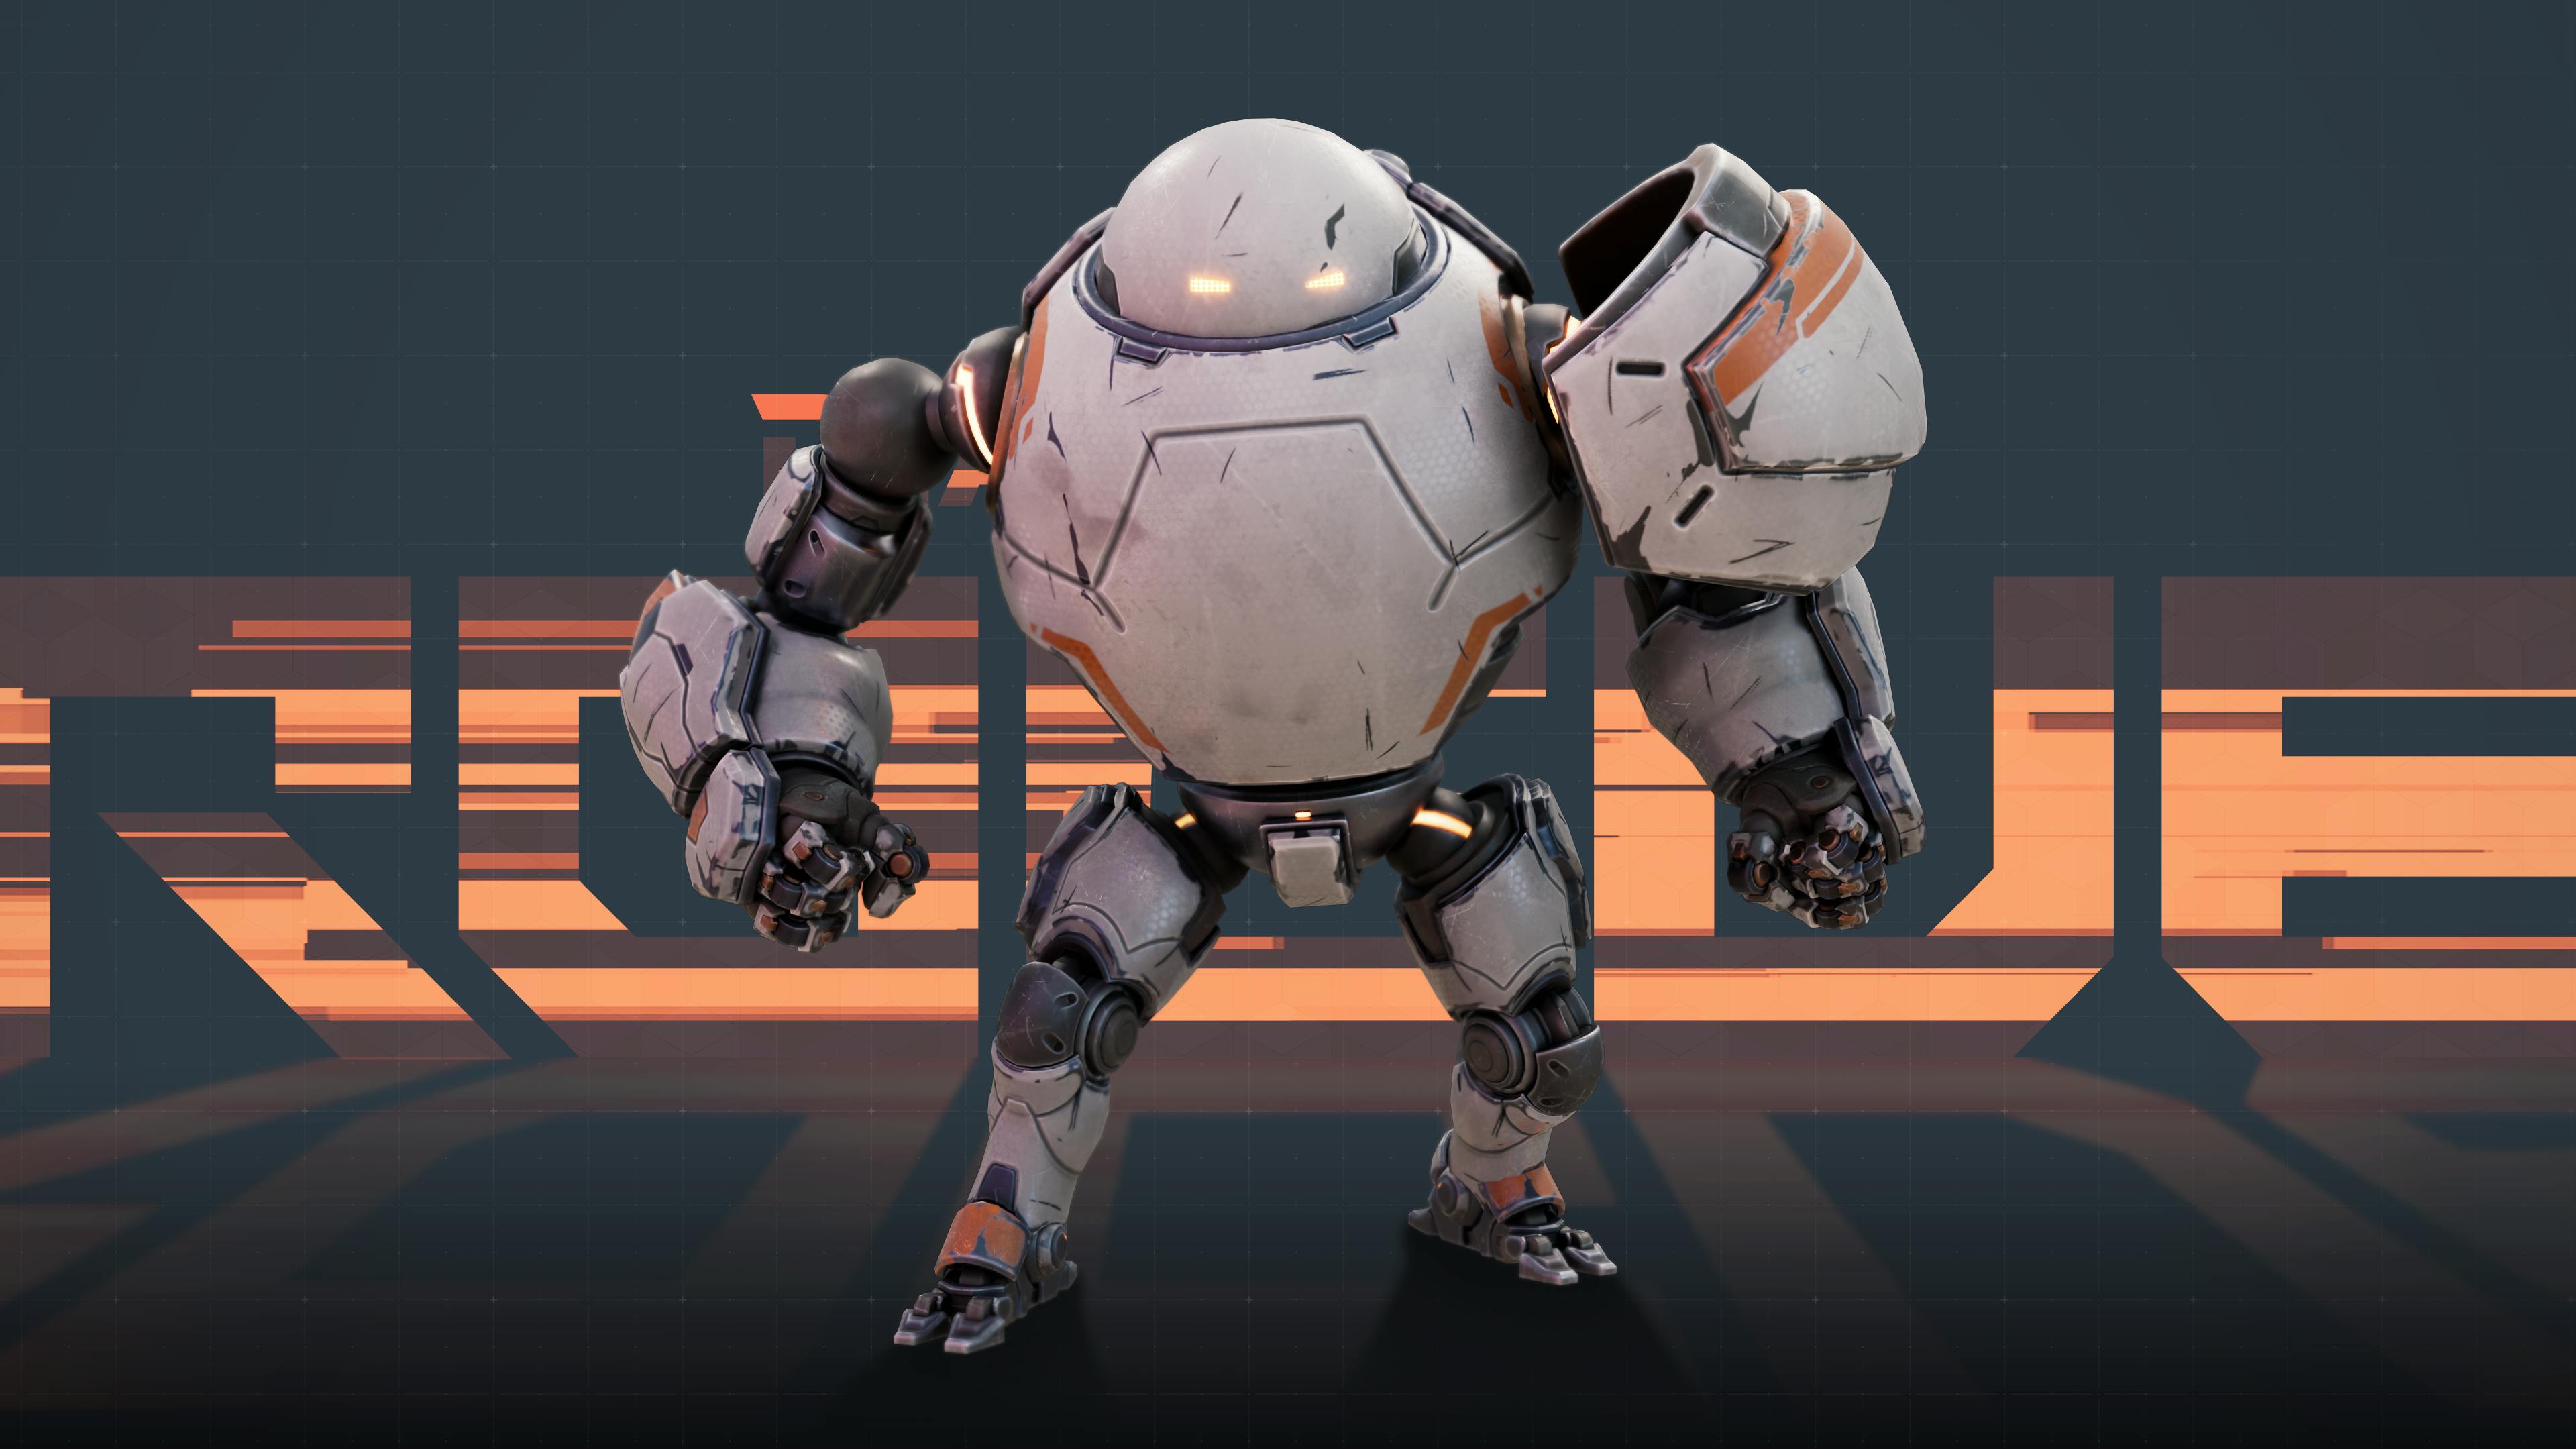 The new suit, Tiny, in Diabotical Rogue